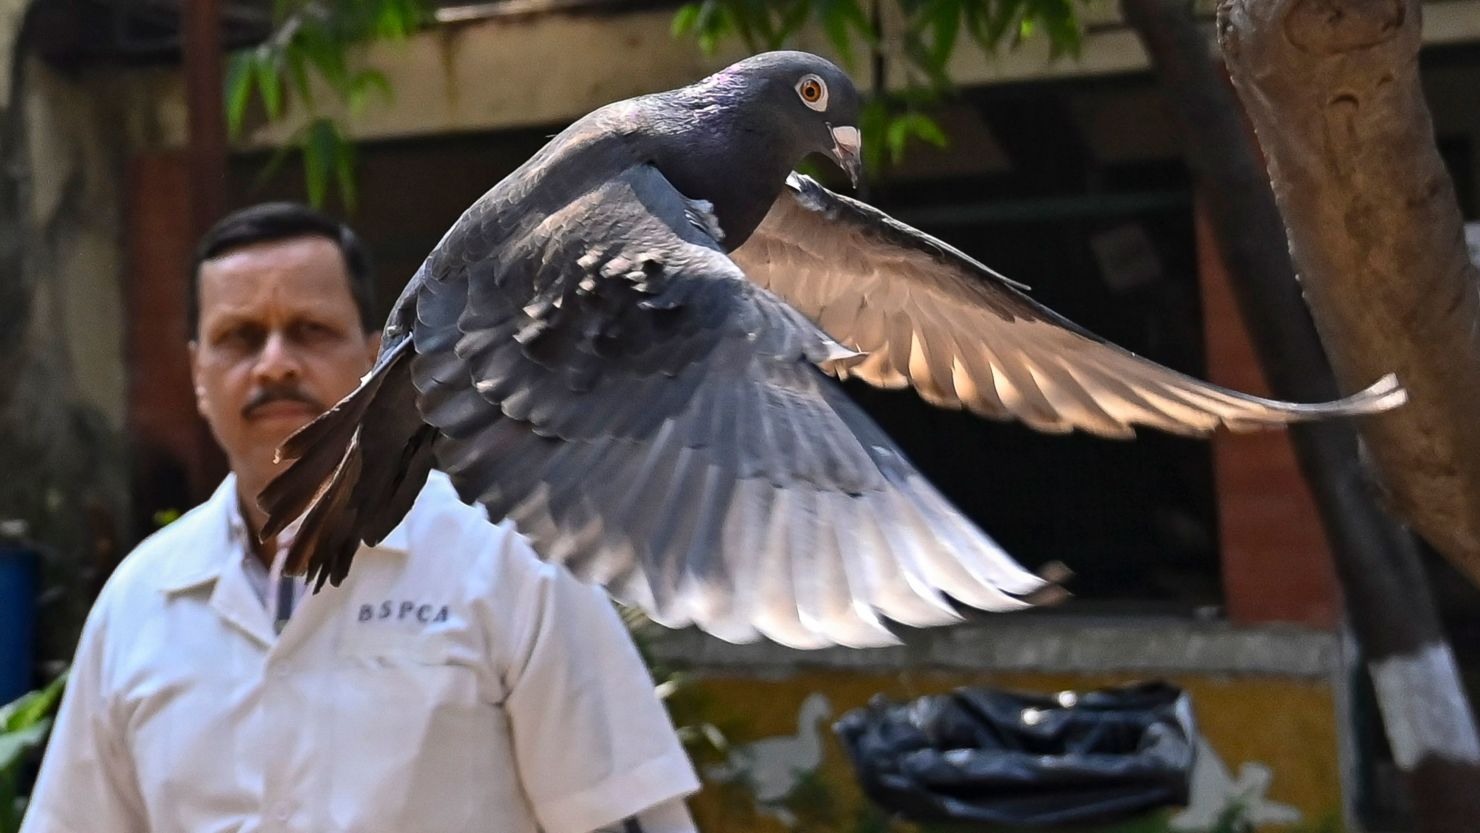 The pigeon is released in Mumbai.